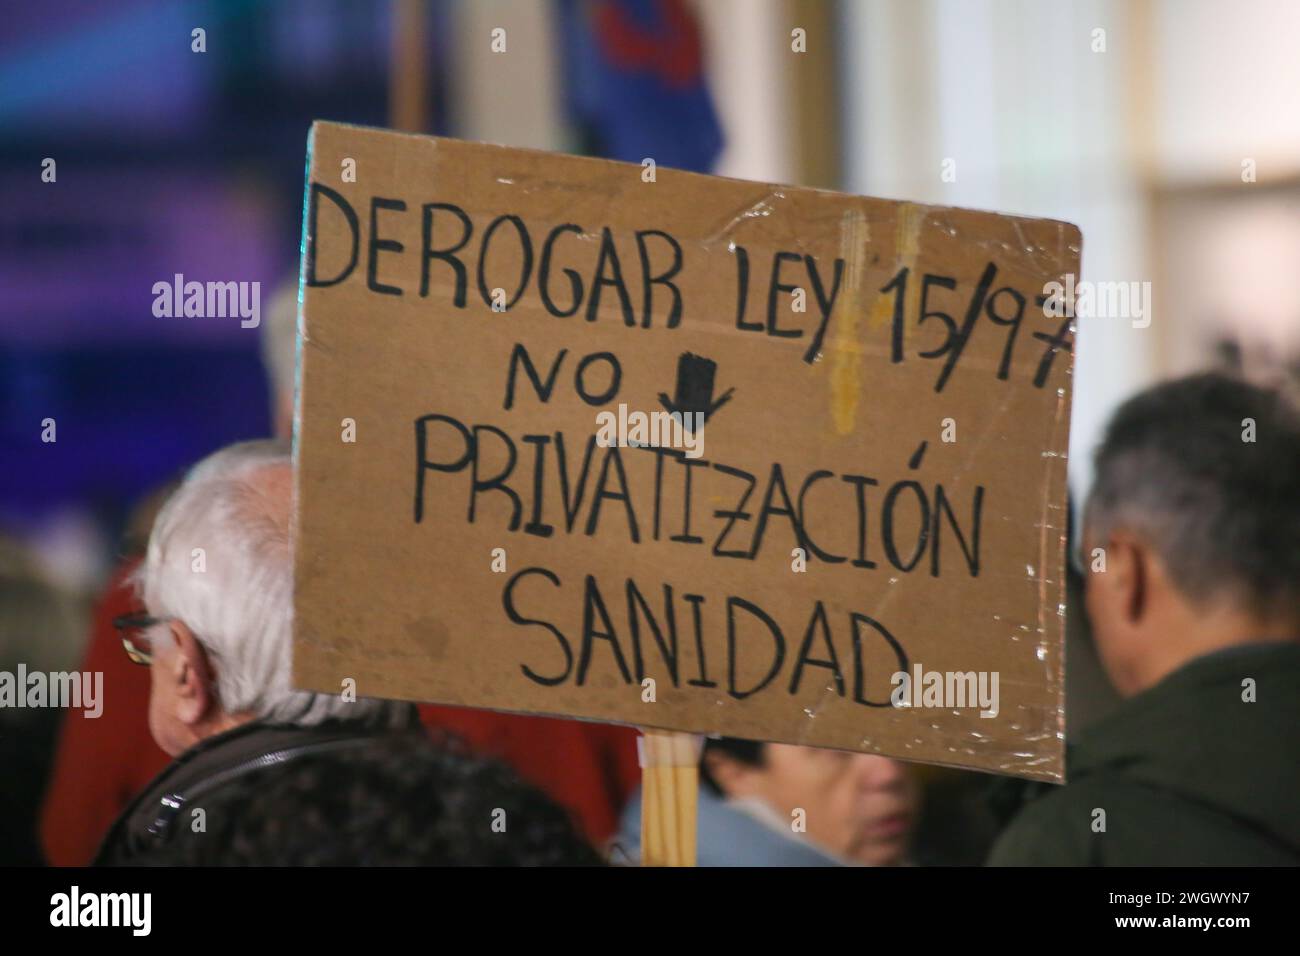 Gijón, Spain, February 6th, 2024: A poster with 'Repeal law 15/97, no privatization of healthcare' during the demonstration for quality public healthcare, on February 6, 2024, in Gijón, Spain. Credit: Alberto Brevers / Alamy Live News. Stock Photo